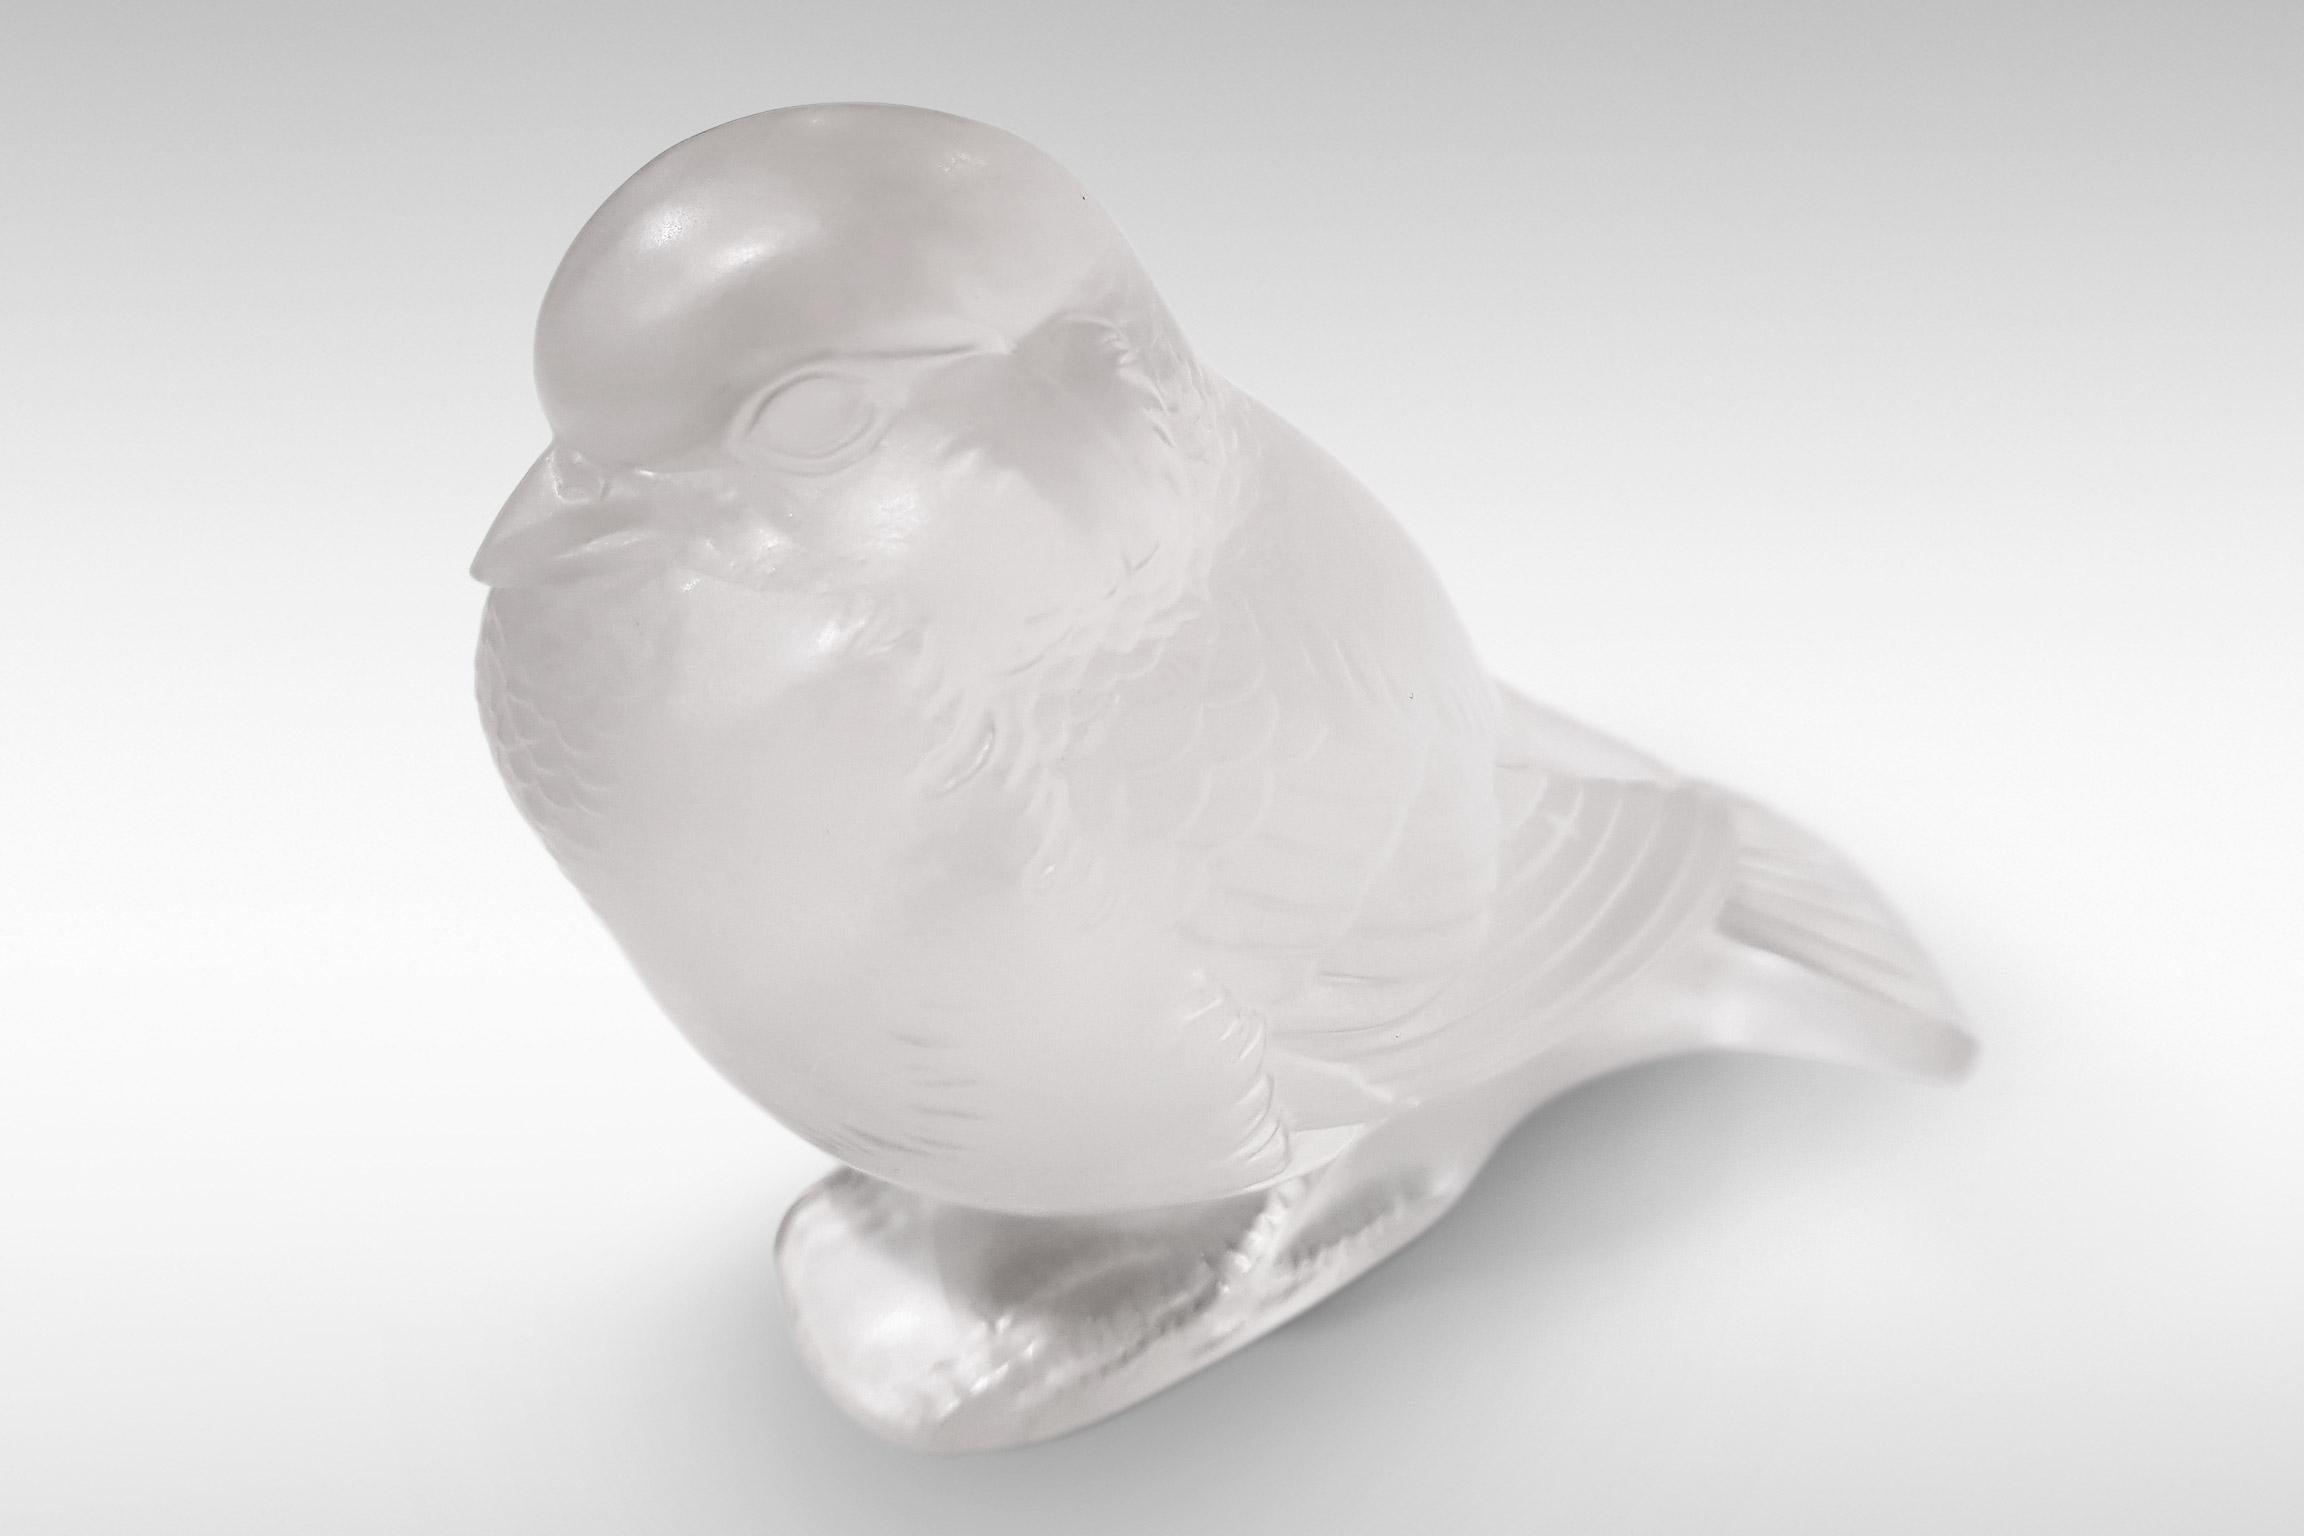 The Art Deco 'Moineau au Fier' (Crouching Sparrow) by Rene Lalique in opalescent glass, circa 1930s.